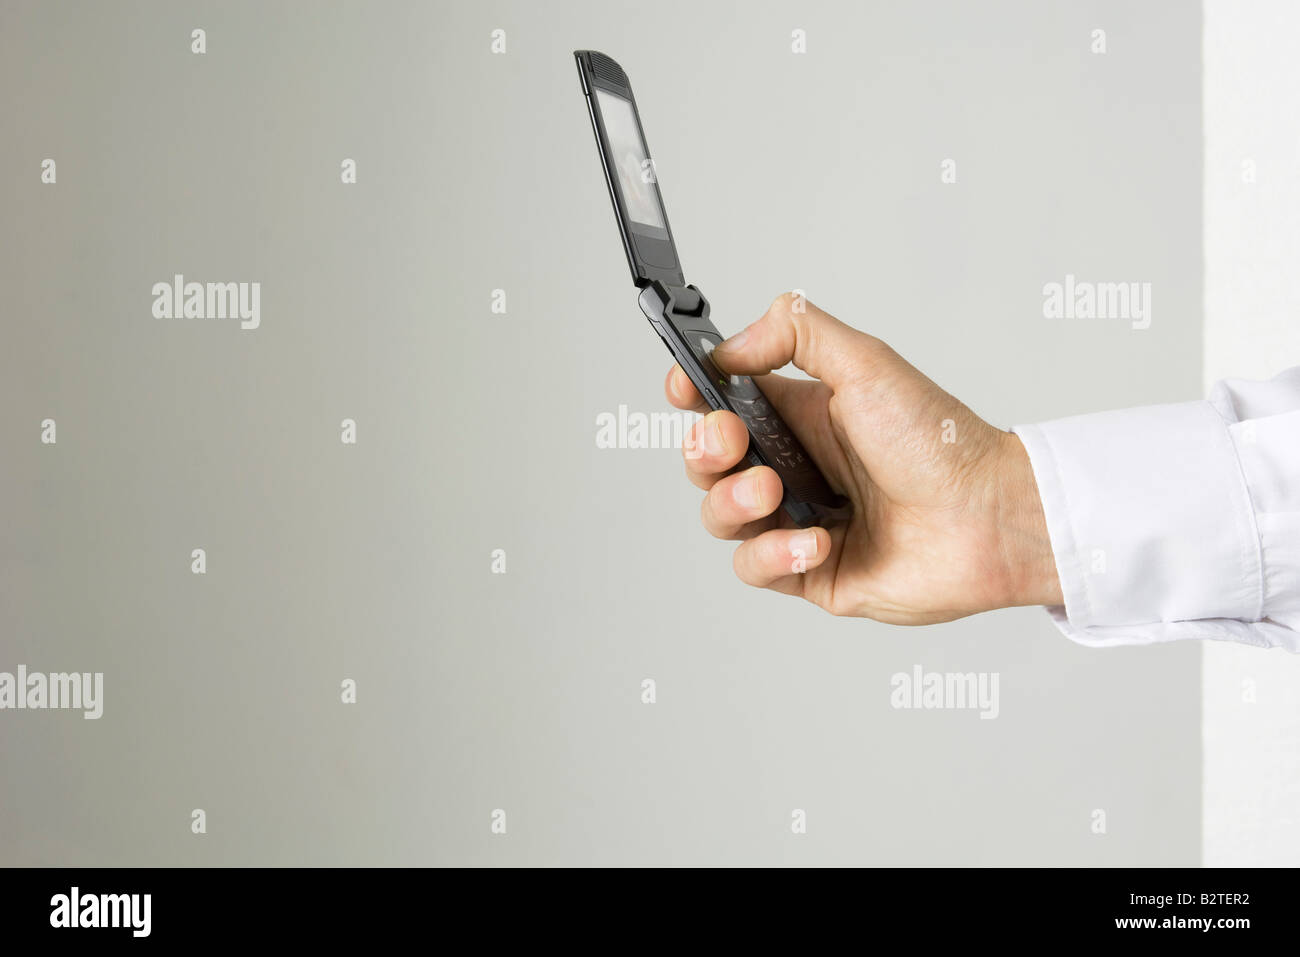 Hand holding cell phone, side view Stock Photo